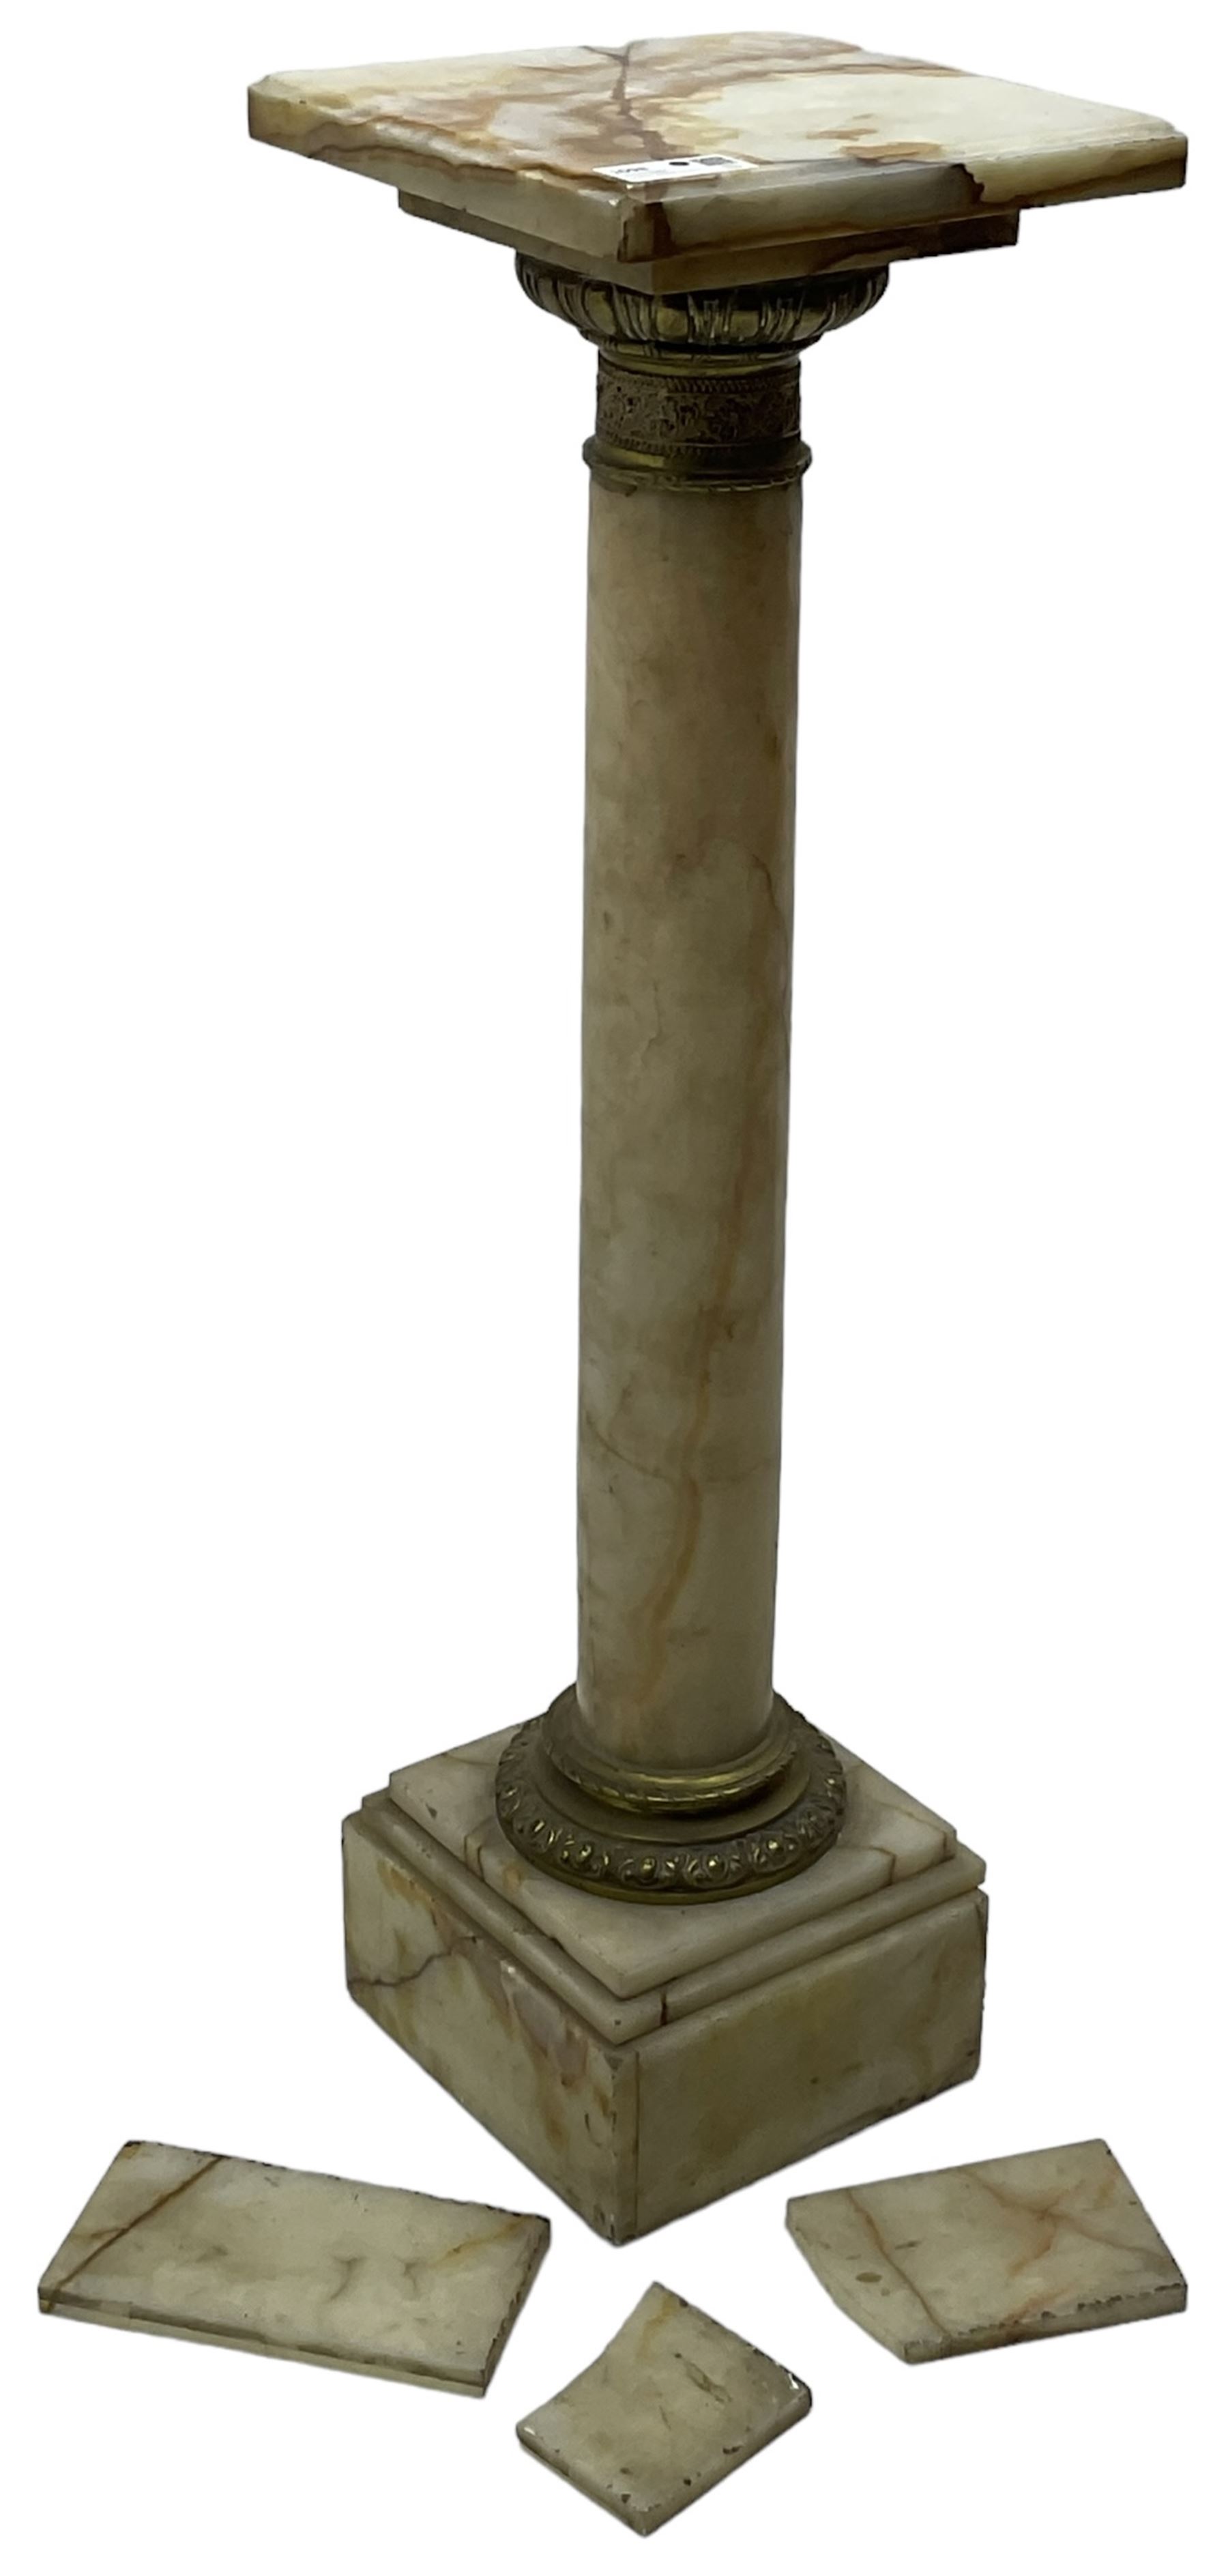 Late 19th century variegated marble torchère or plant stand